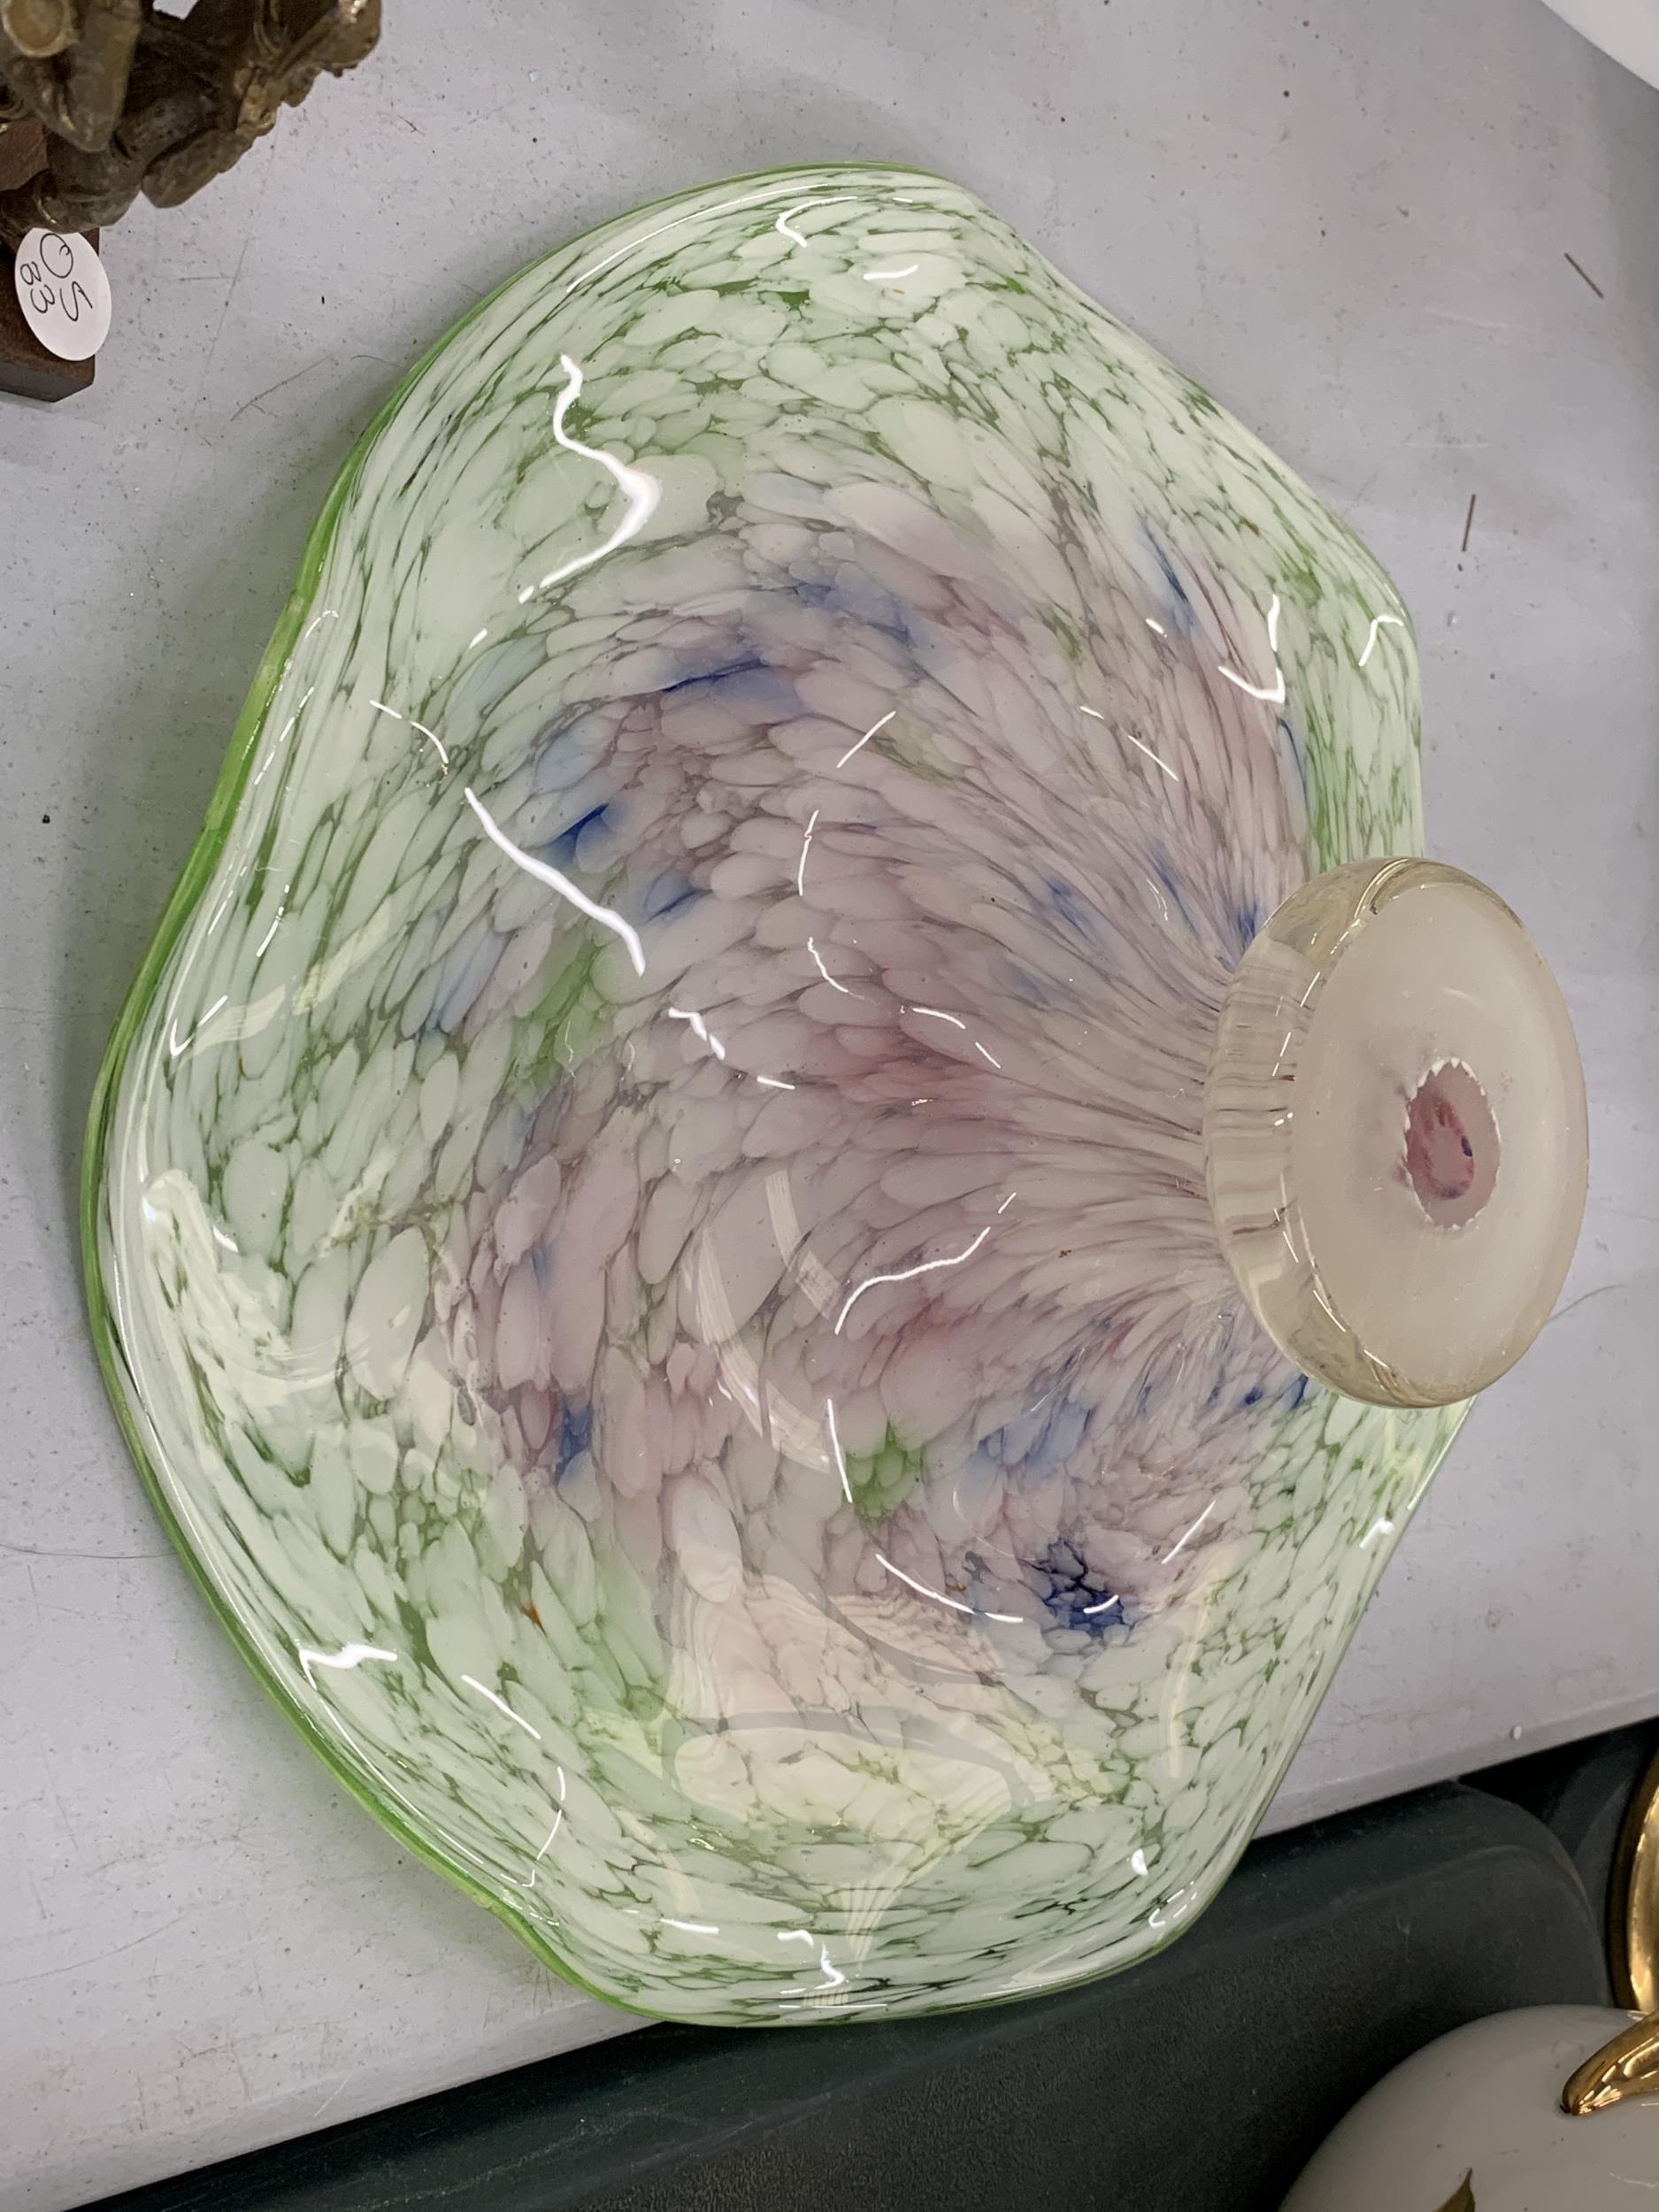 AN ART GLASS MURANO STYLE FLARED GLASS FOOTED BOWL - Image 3 of 3